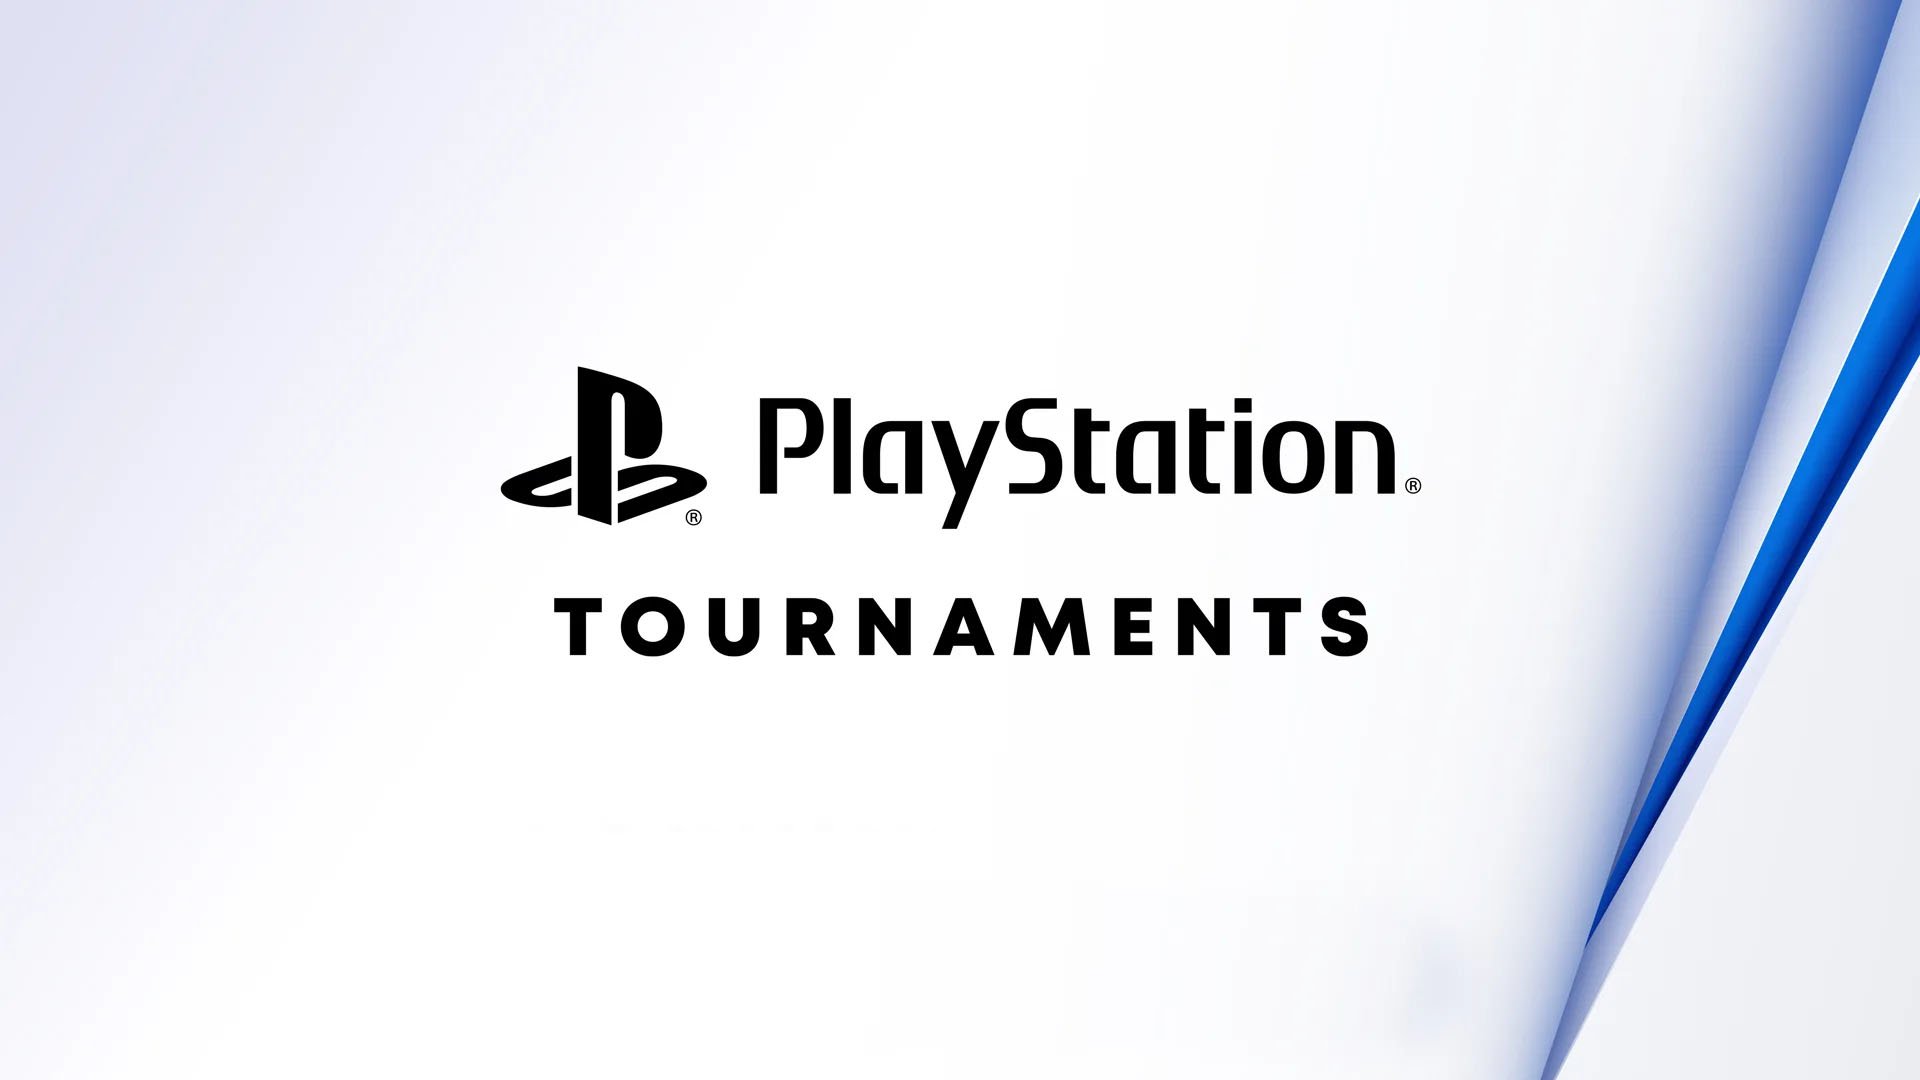 #
      PlayStation Tournaments for PS5 now available